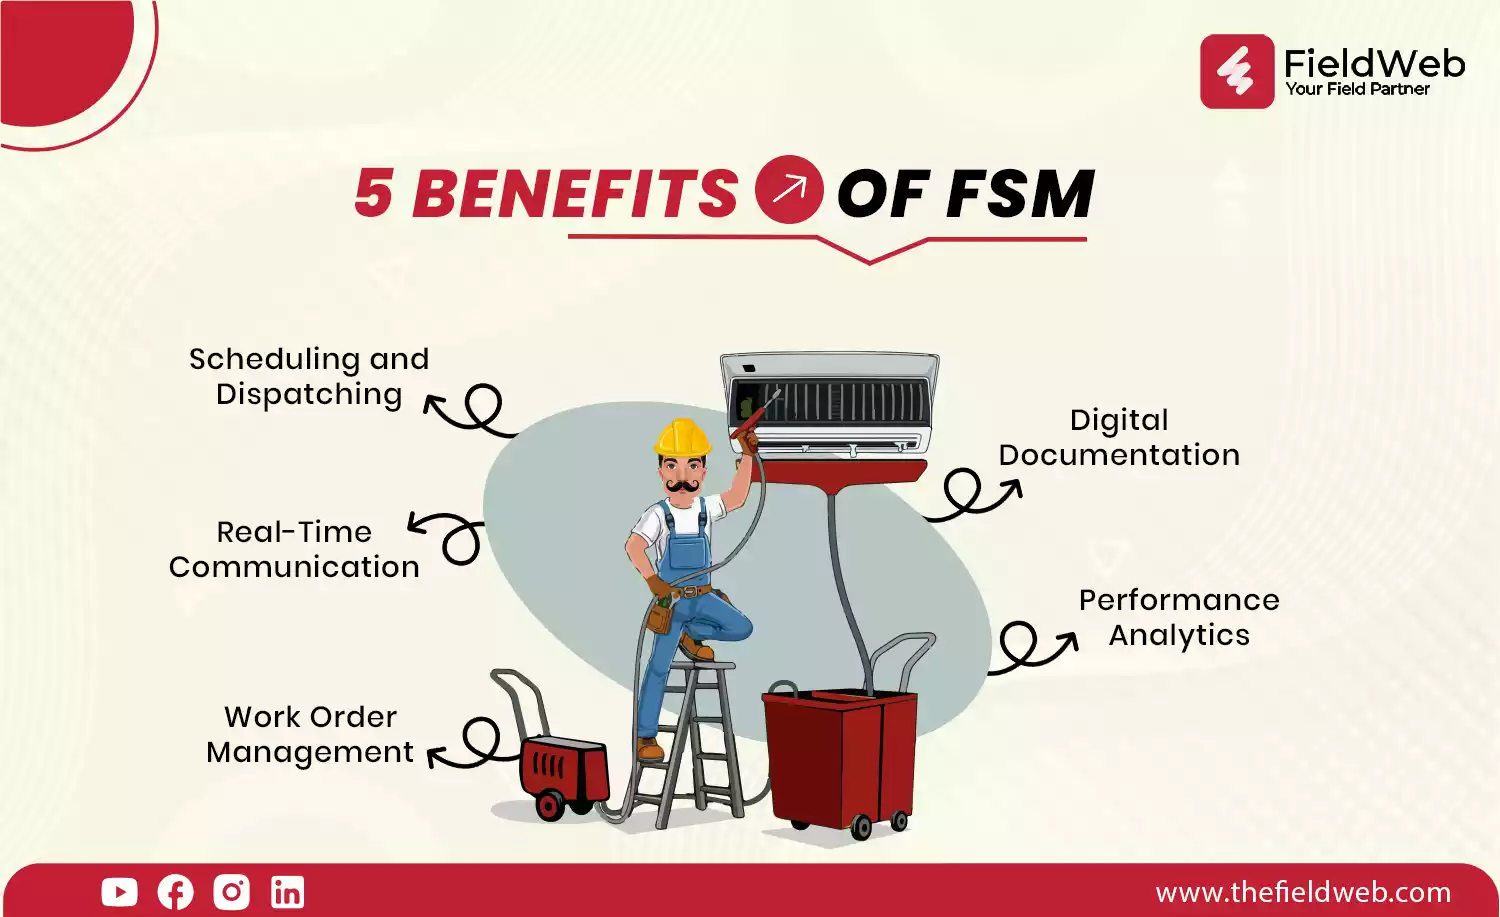 image is displaying 5 benefits of having a field service management software